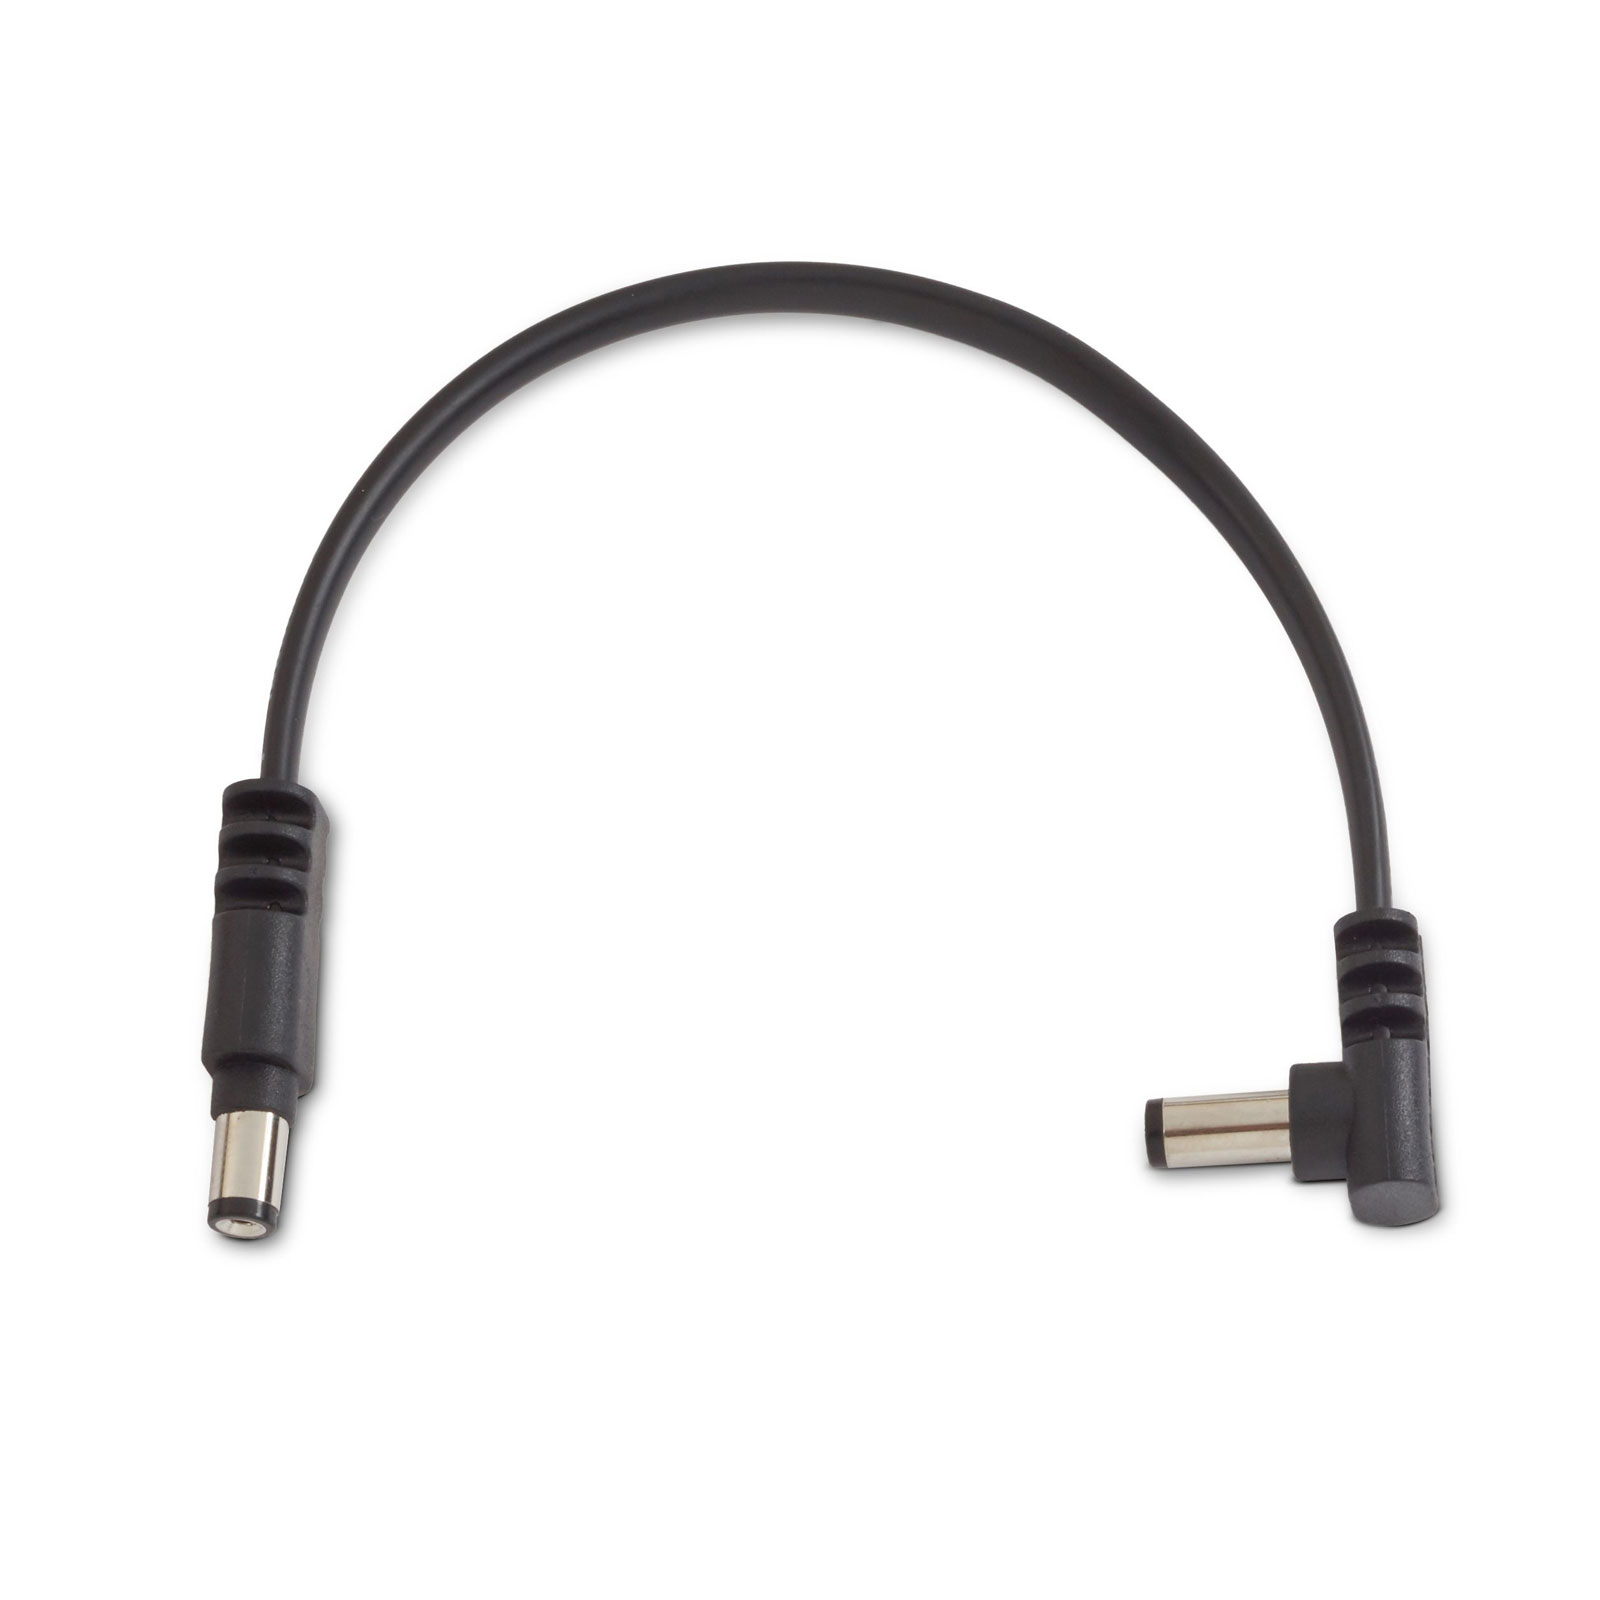 ROCKBOARD FLAT POWER CABLES CAB-POWER-15-AS